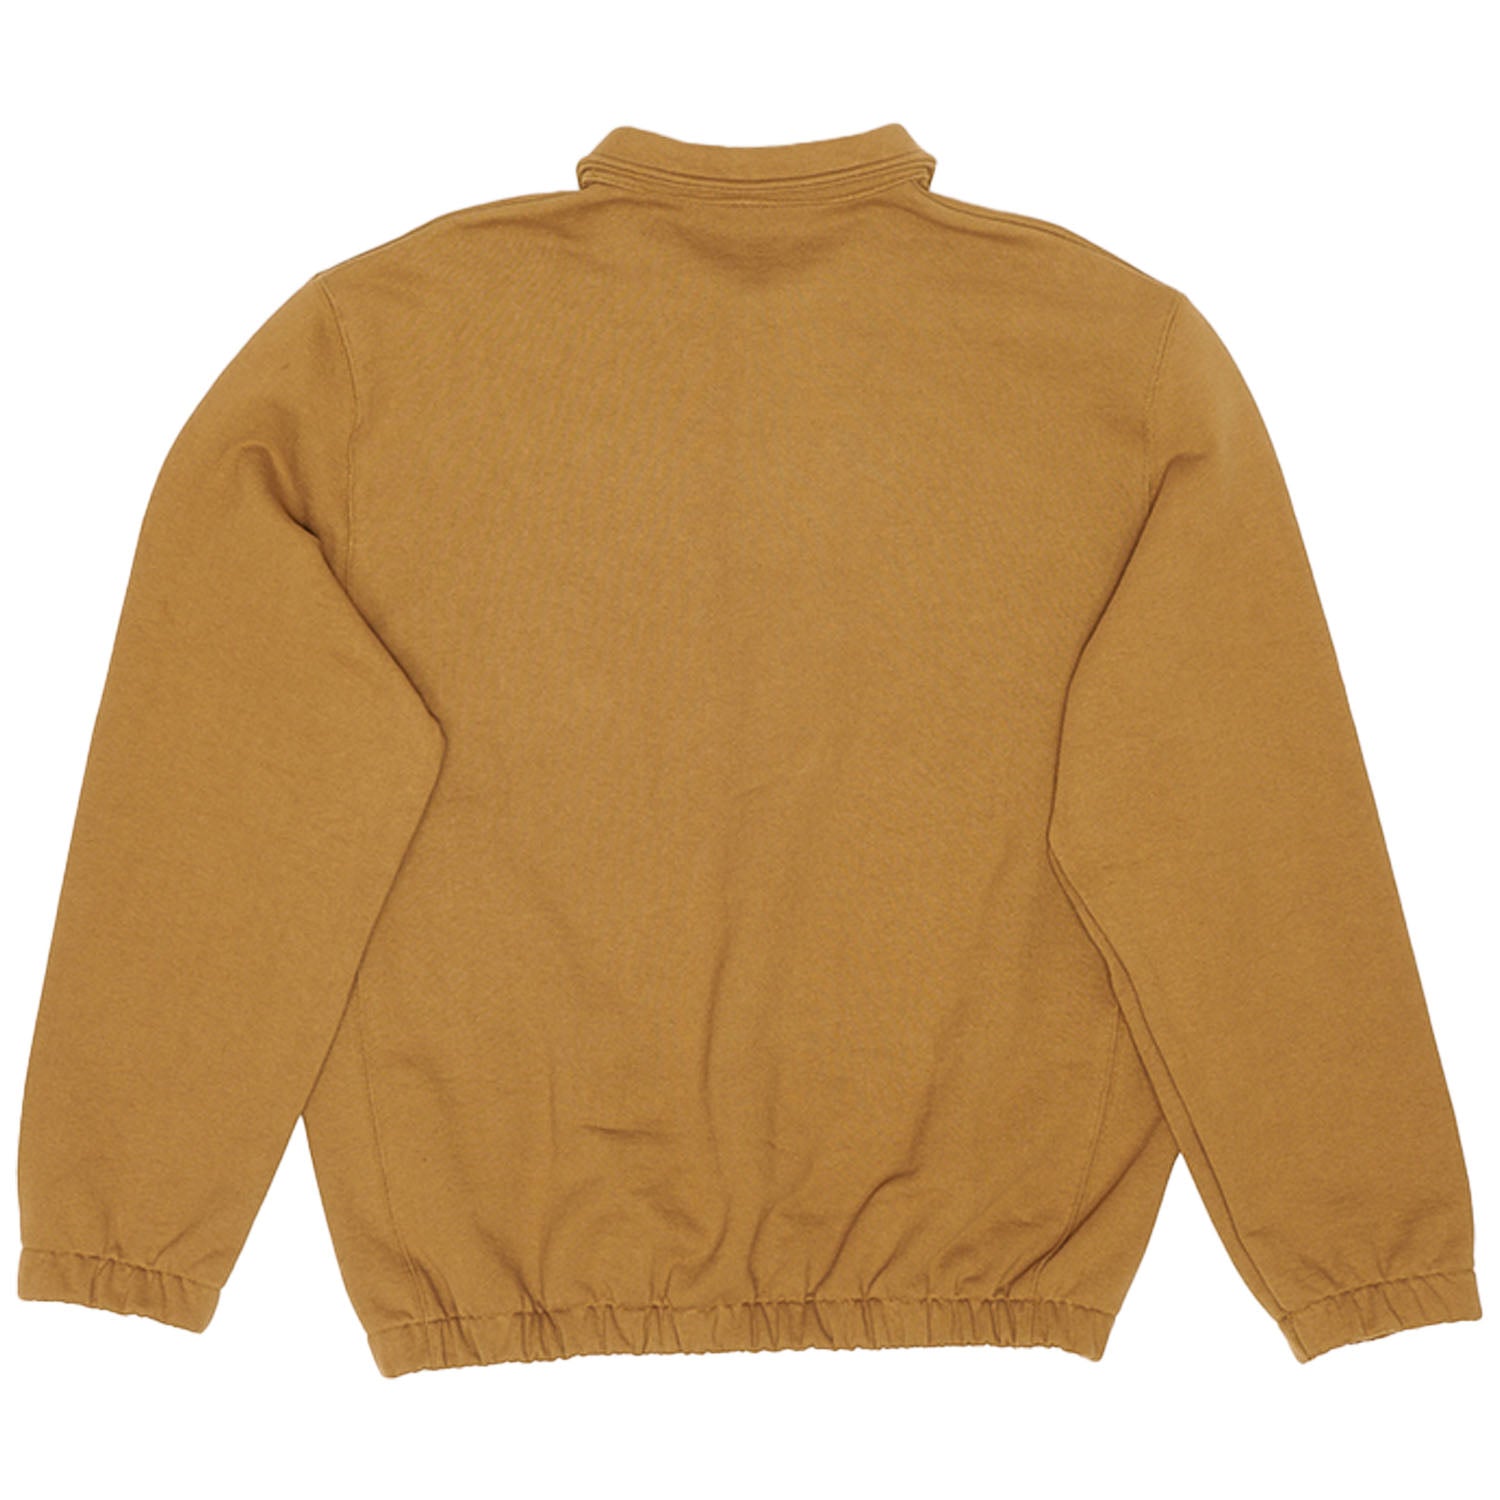 Unbrushed Polo Sweater (Coyote)